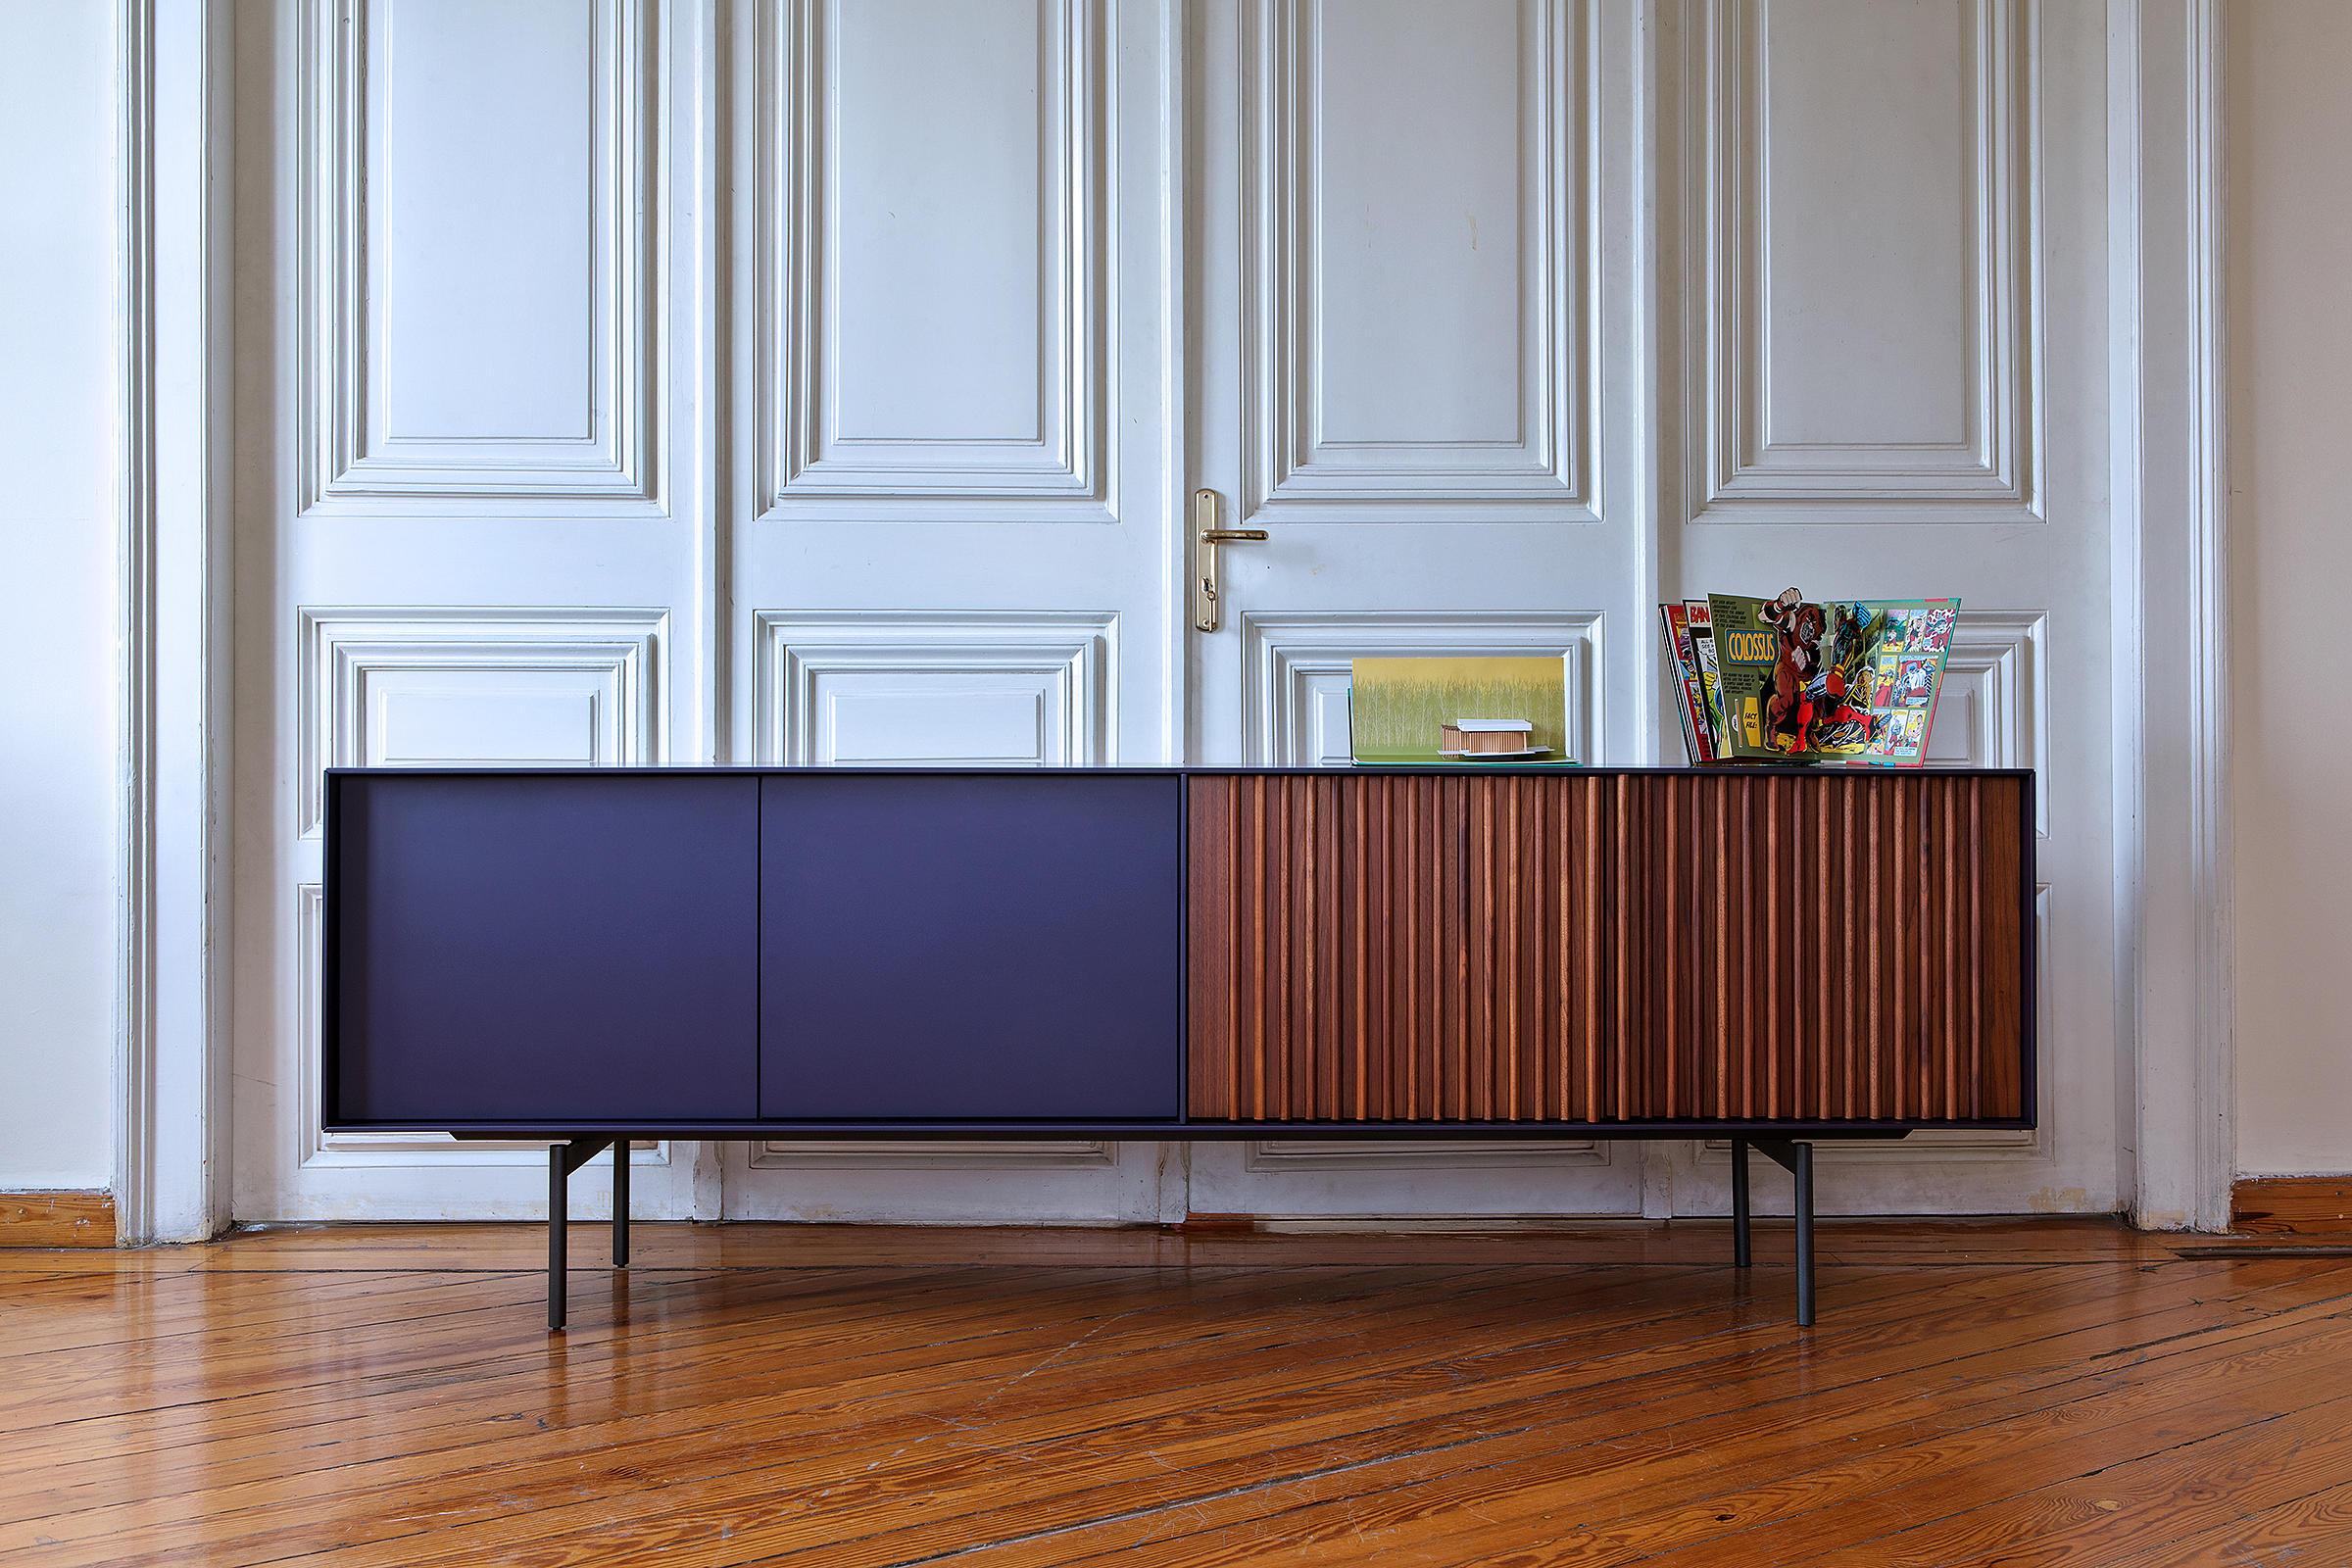 Handcrafted sideboard in various sizes, with two push-pull doors in purple lacquer and two doors with vertical American walnut bars. Inside shelf. 
Metal base lacquered in black.
Available in variety of wood and lacquer finishes upon request.
Please